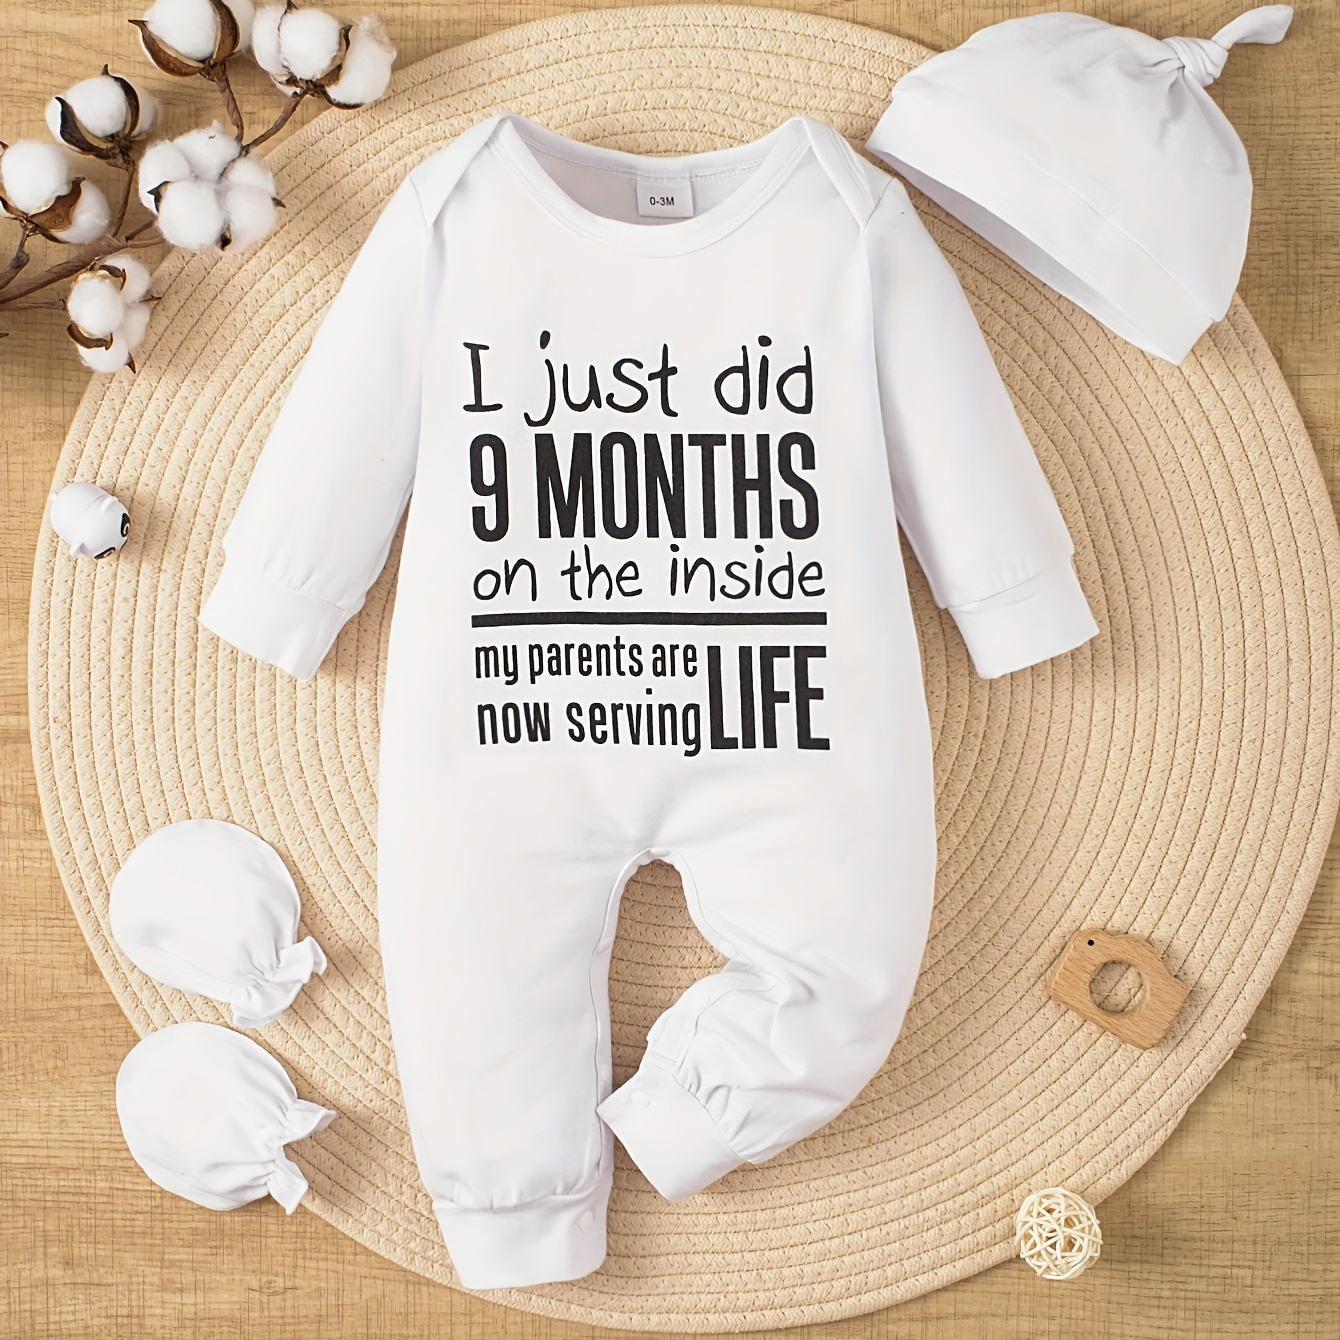 

Infant's Funny "i Just Did 9 Months" Print Bodysuit, Comfy Long Sleeve Onesie, Baby Boy's Clothing, As Gift